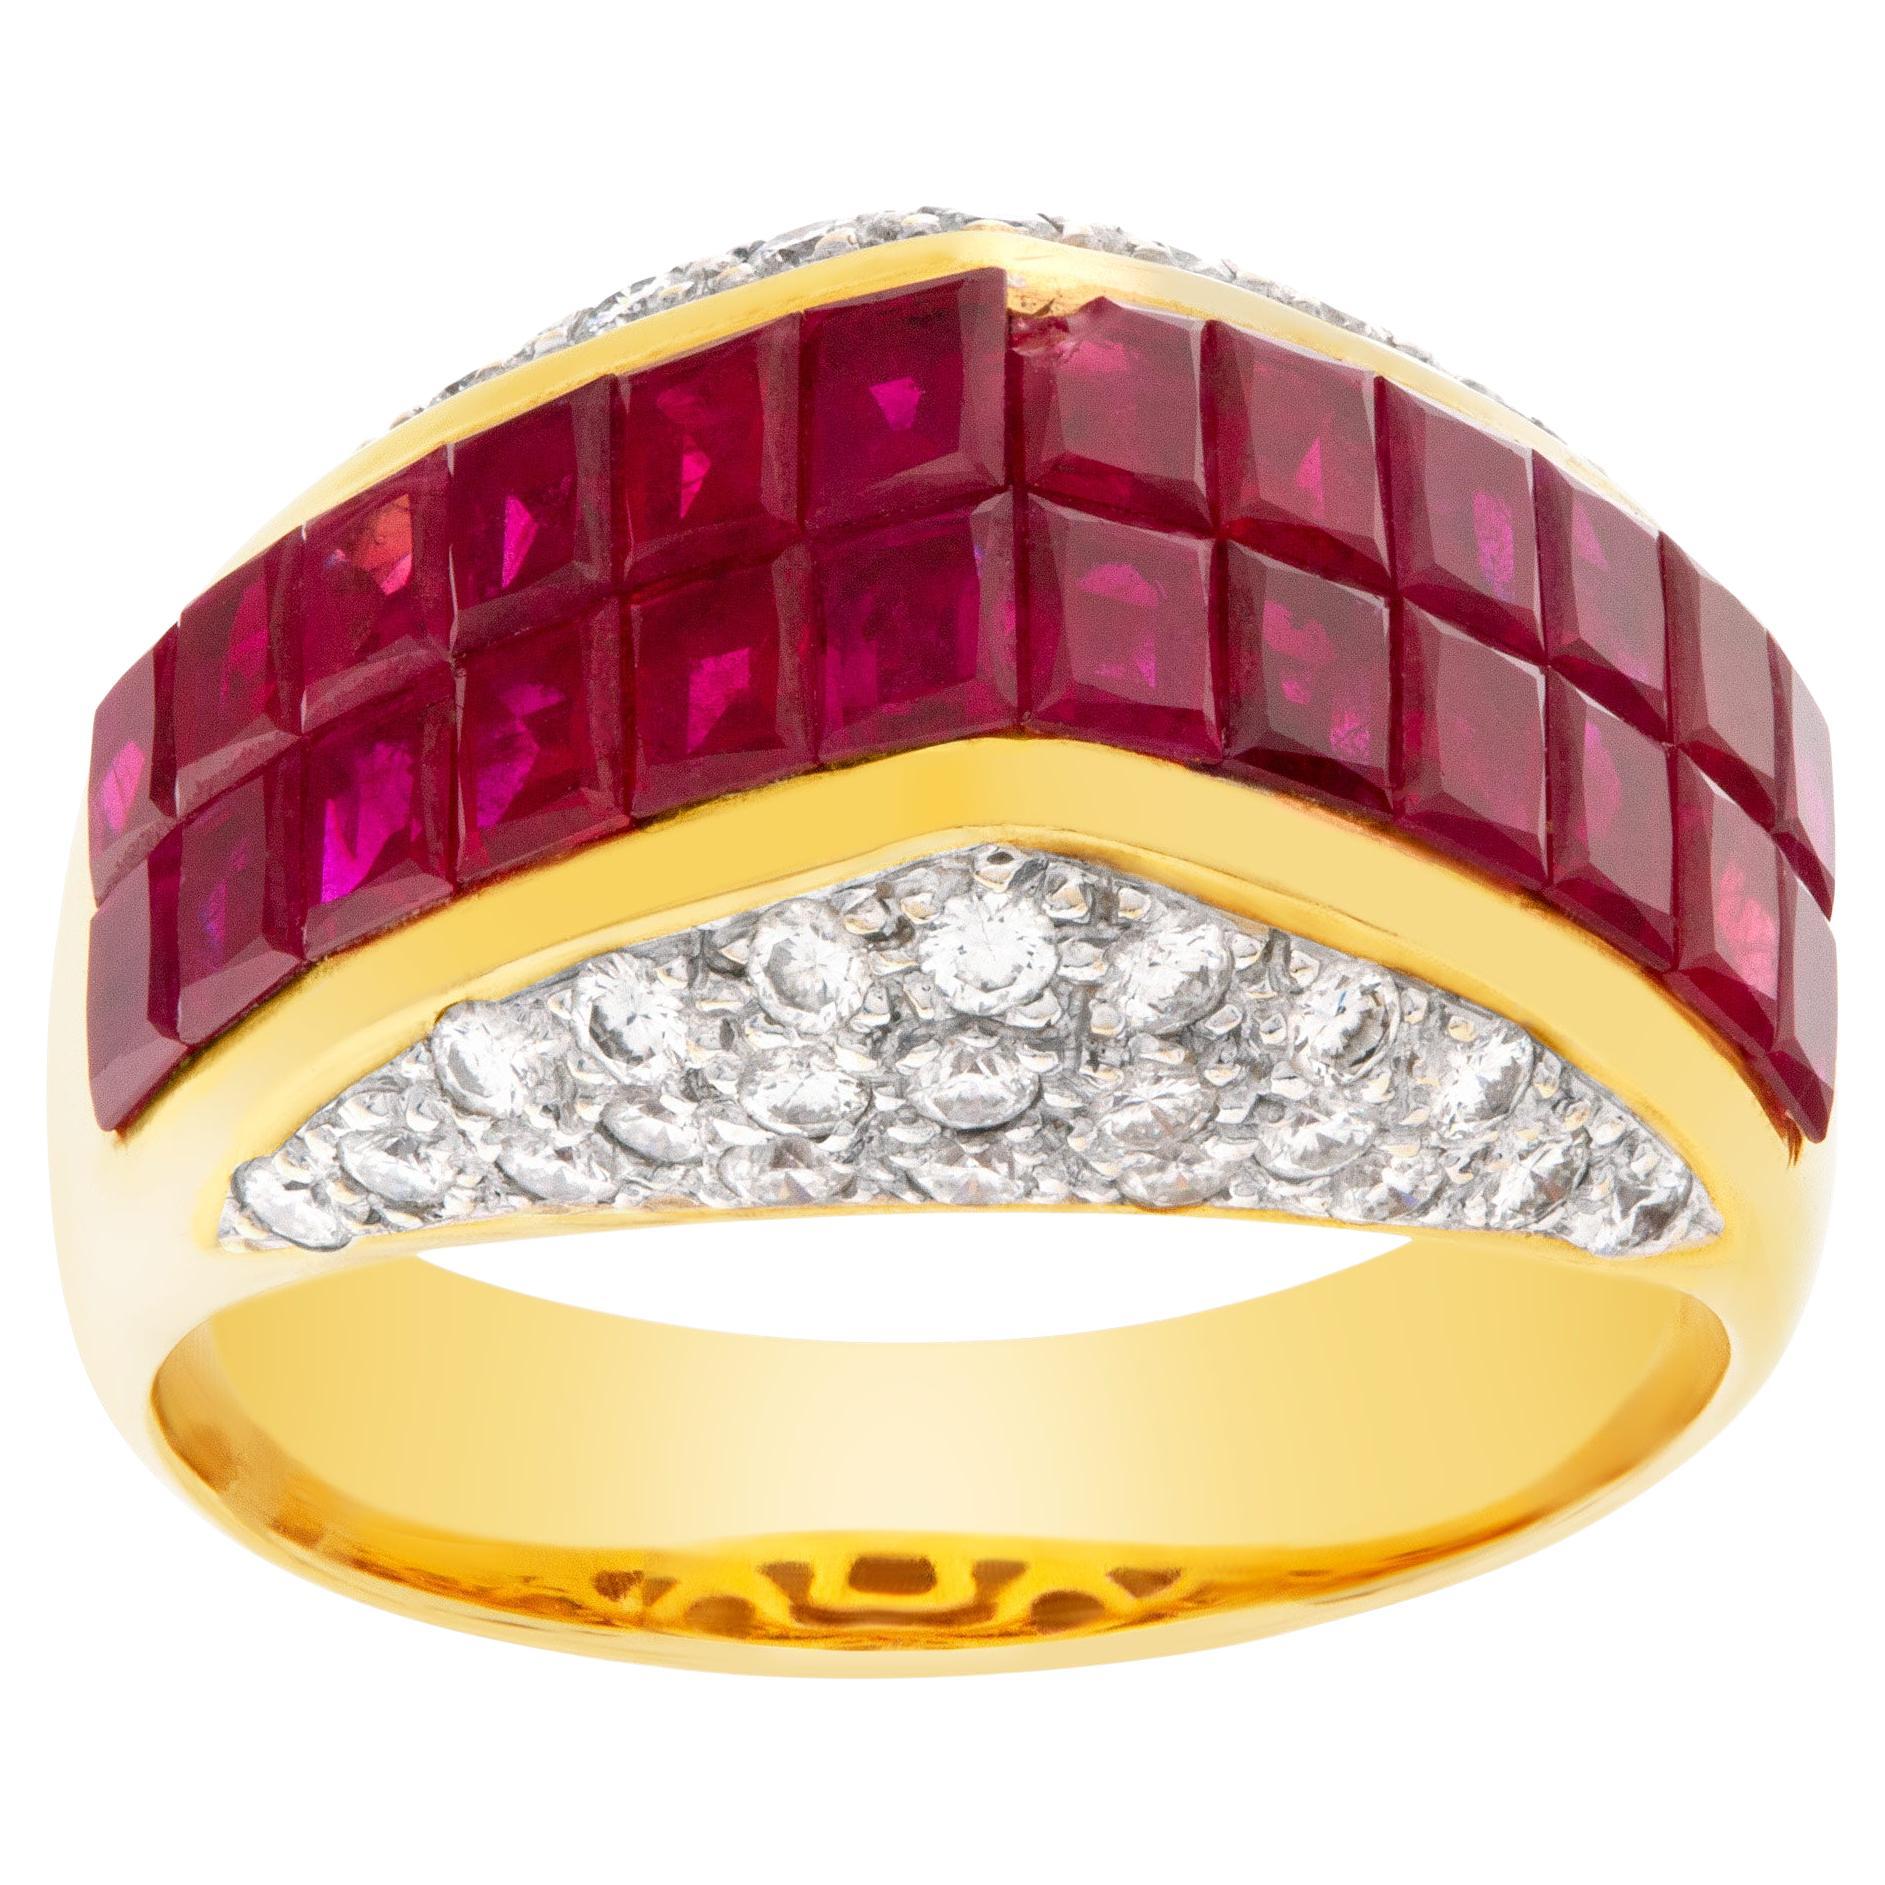 Ring in 18k Yellow Gold with over 2.40 Carats in Rubies and 1 Carat in Diamonds For Sale